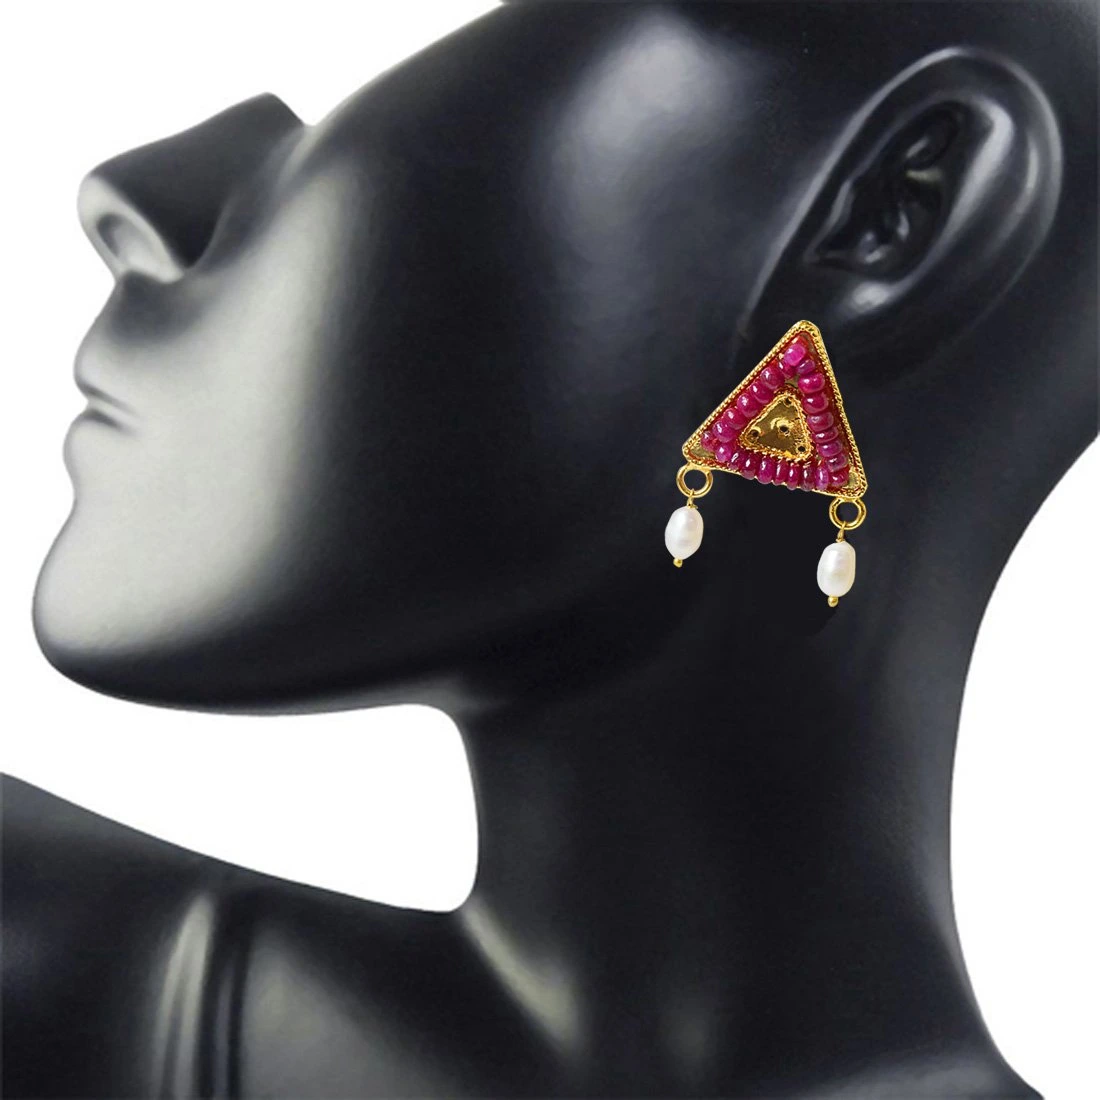 Geometrical Shaped Real Ruby Beads and Rice Pearl Gold Plated Earrings for Women (SE334)